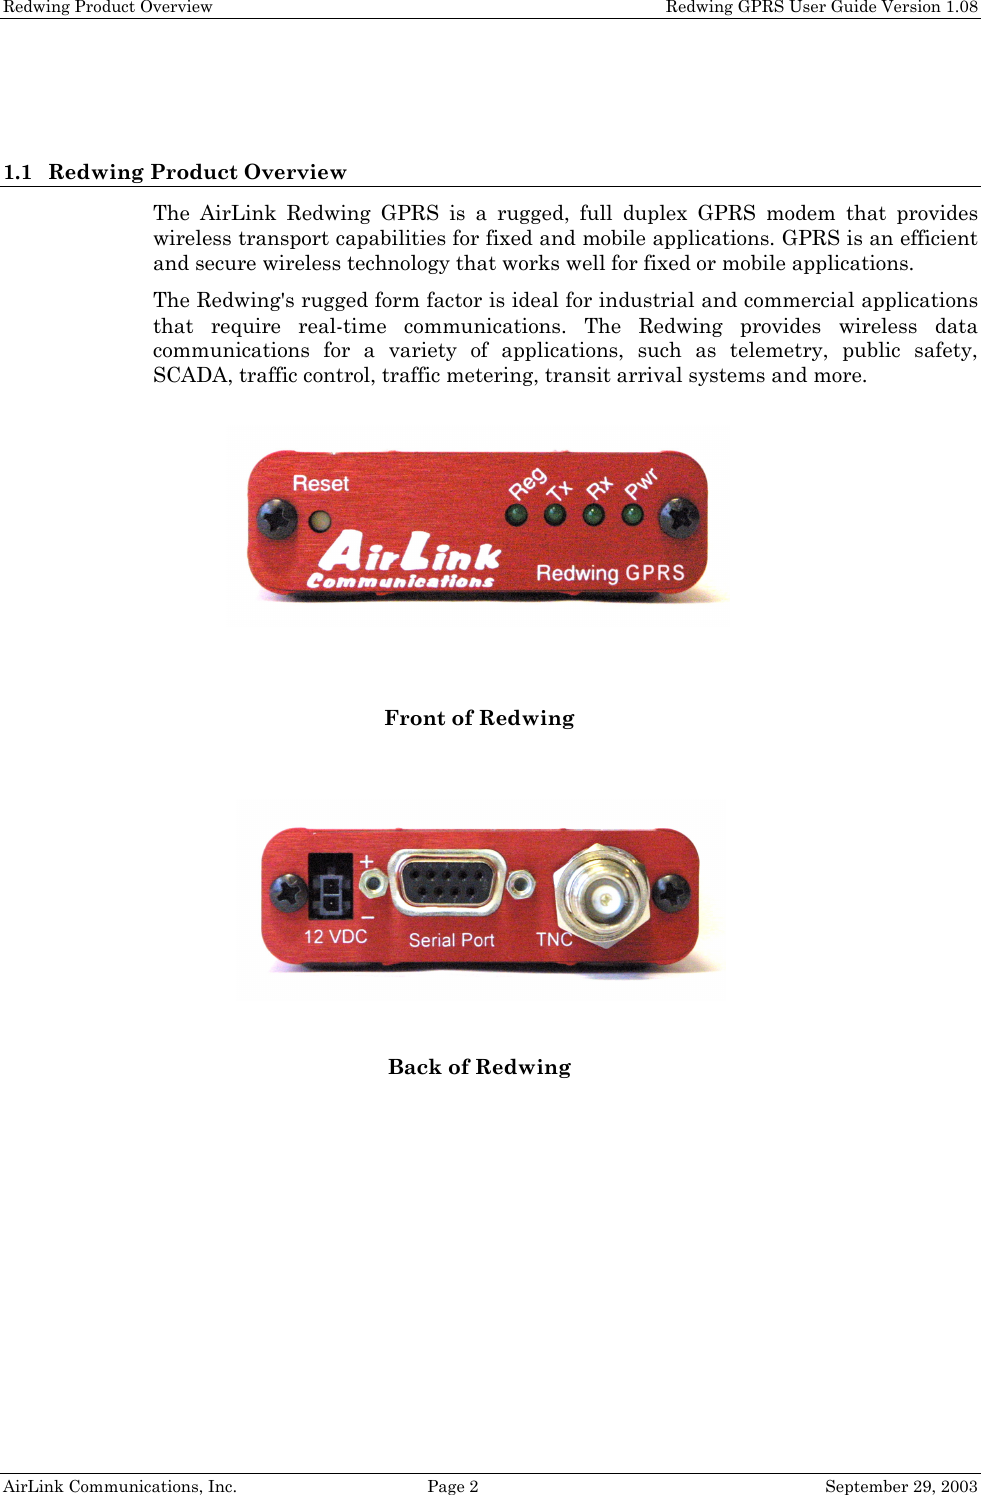 Redwing Product Overview    Redwing GPRS User Guide Version 1.08 AirLink Communications, Inc.  Page 2  September 29, 2003   1.1 Redwing Product Overview The AirLink Redwing GPRS is a rugged, full duplex GPRS modem that provides wireless transport capabilities for fixed and mobile applications. GPRS is an efficient and secure wireless technology that works well for fixed or mobile applications. The Redwing&apos;s rugged form factor is ideal for industrial and commercial applications that require real-time communications. The Redwing provides wireless data communications for a variety of applications, such as telemetry, public safety, SCADA, traffic control, traffic metering, transit arrival systems and more.   Front of Redwing  Back of Redwing   